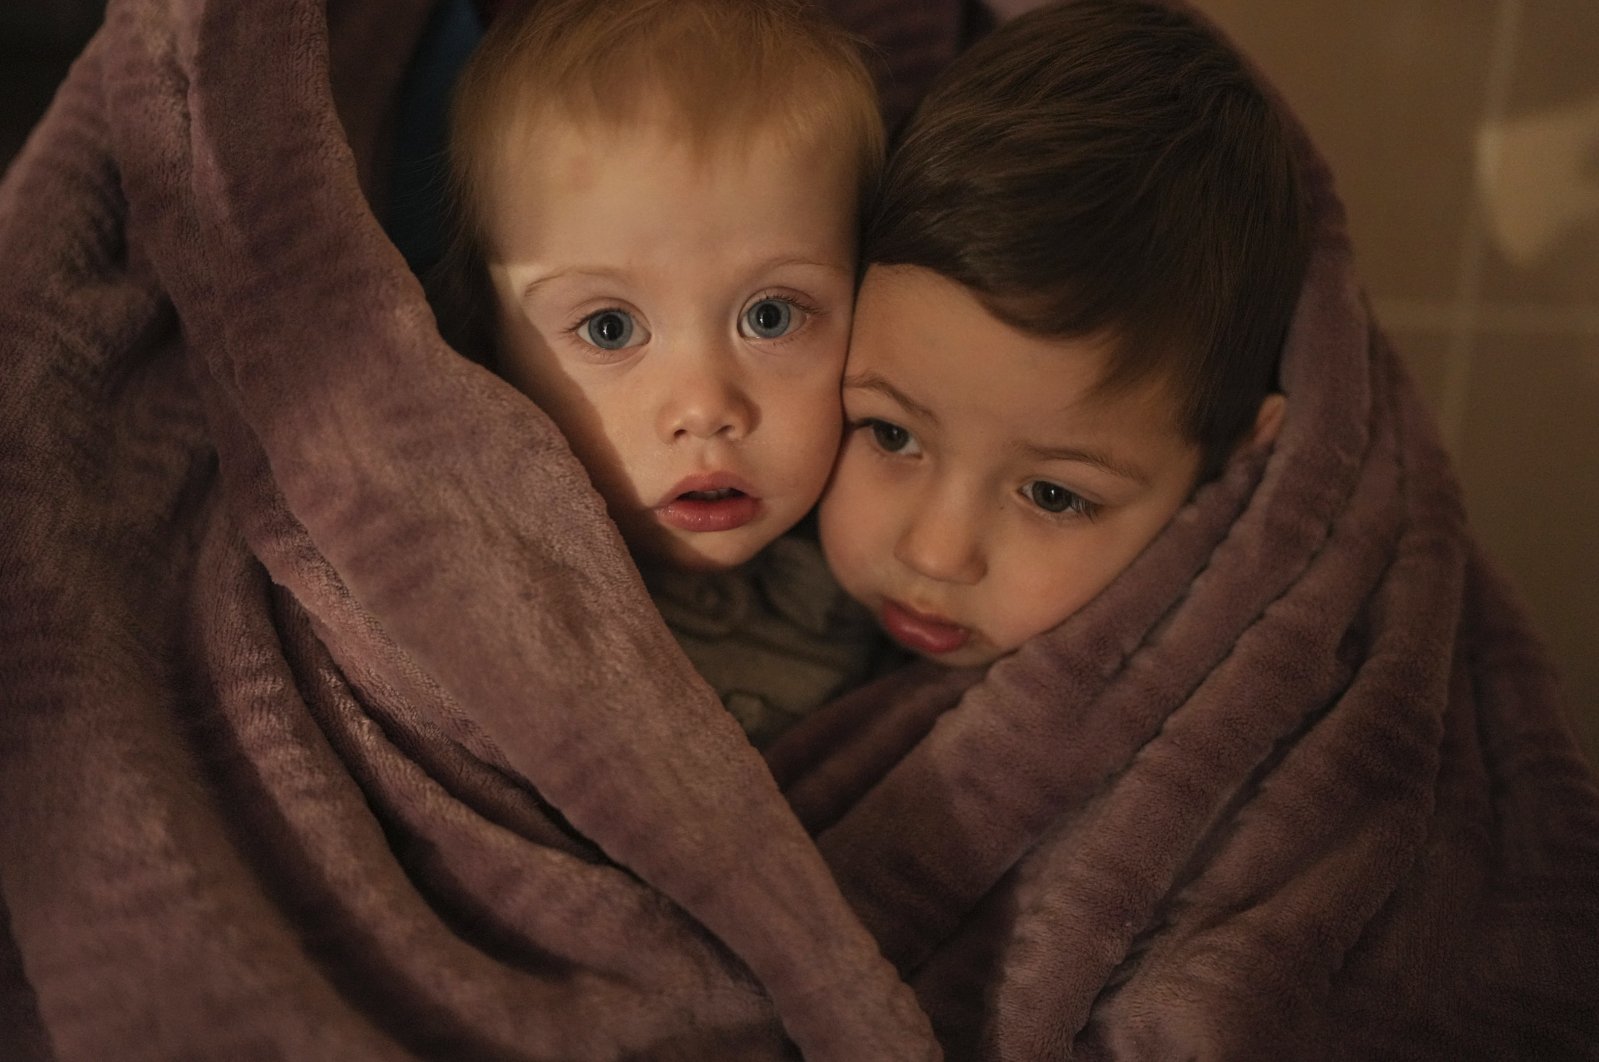 The children of medical workers warm themselves in a blanket as they wait for their relatives in a hospital in Mariupol, Ukraine, March 4, 2022. (AP Photo)